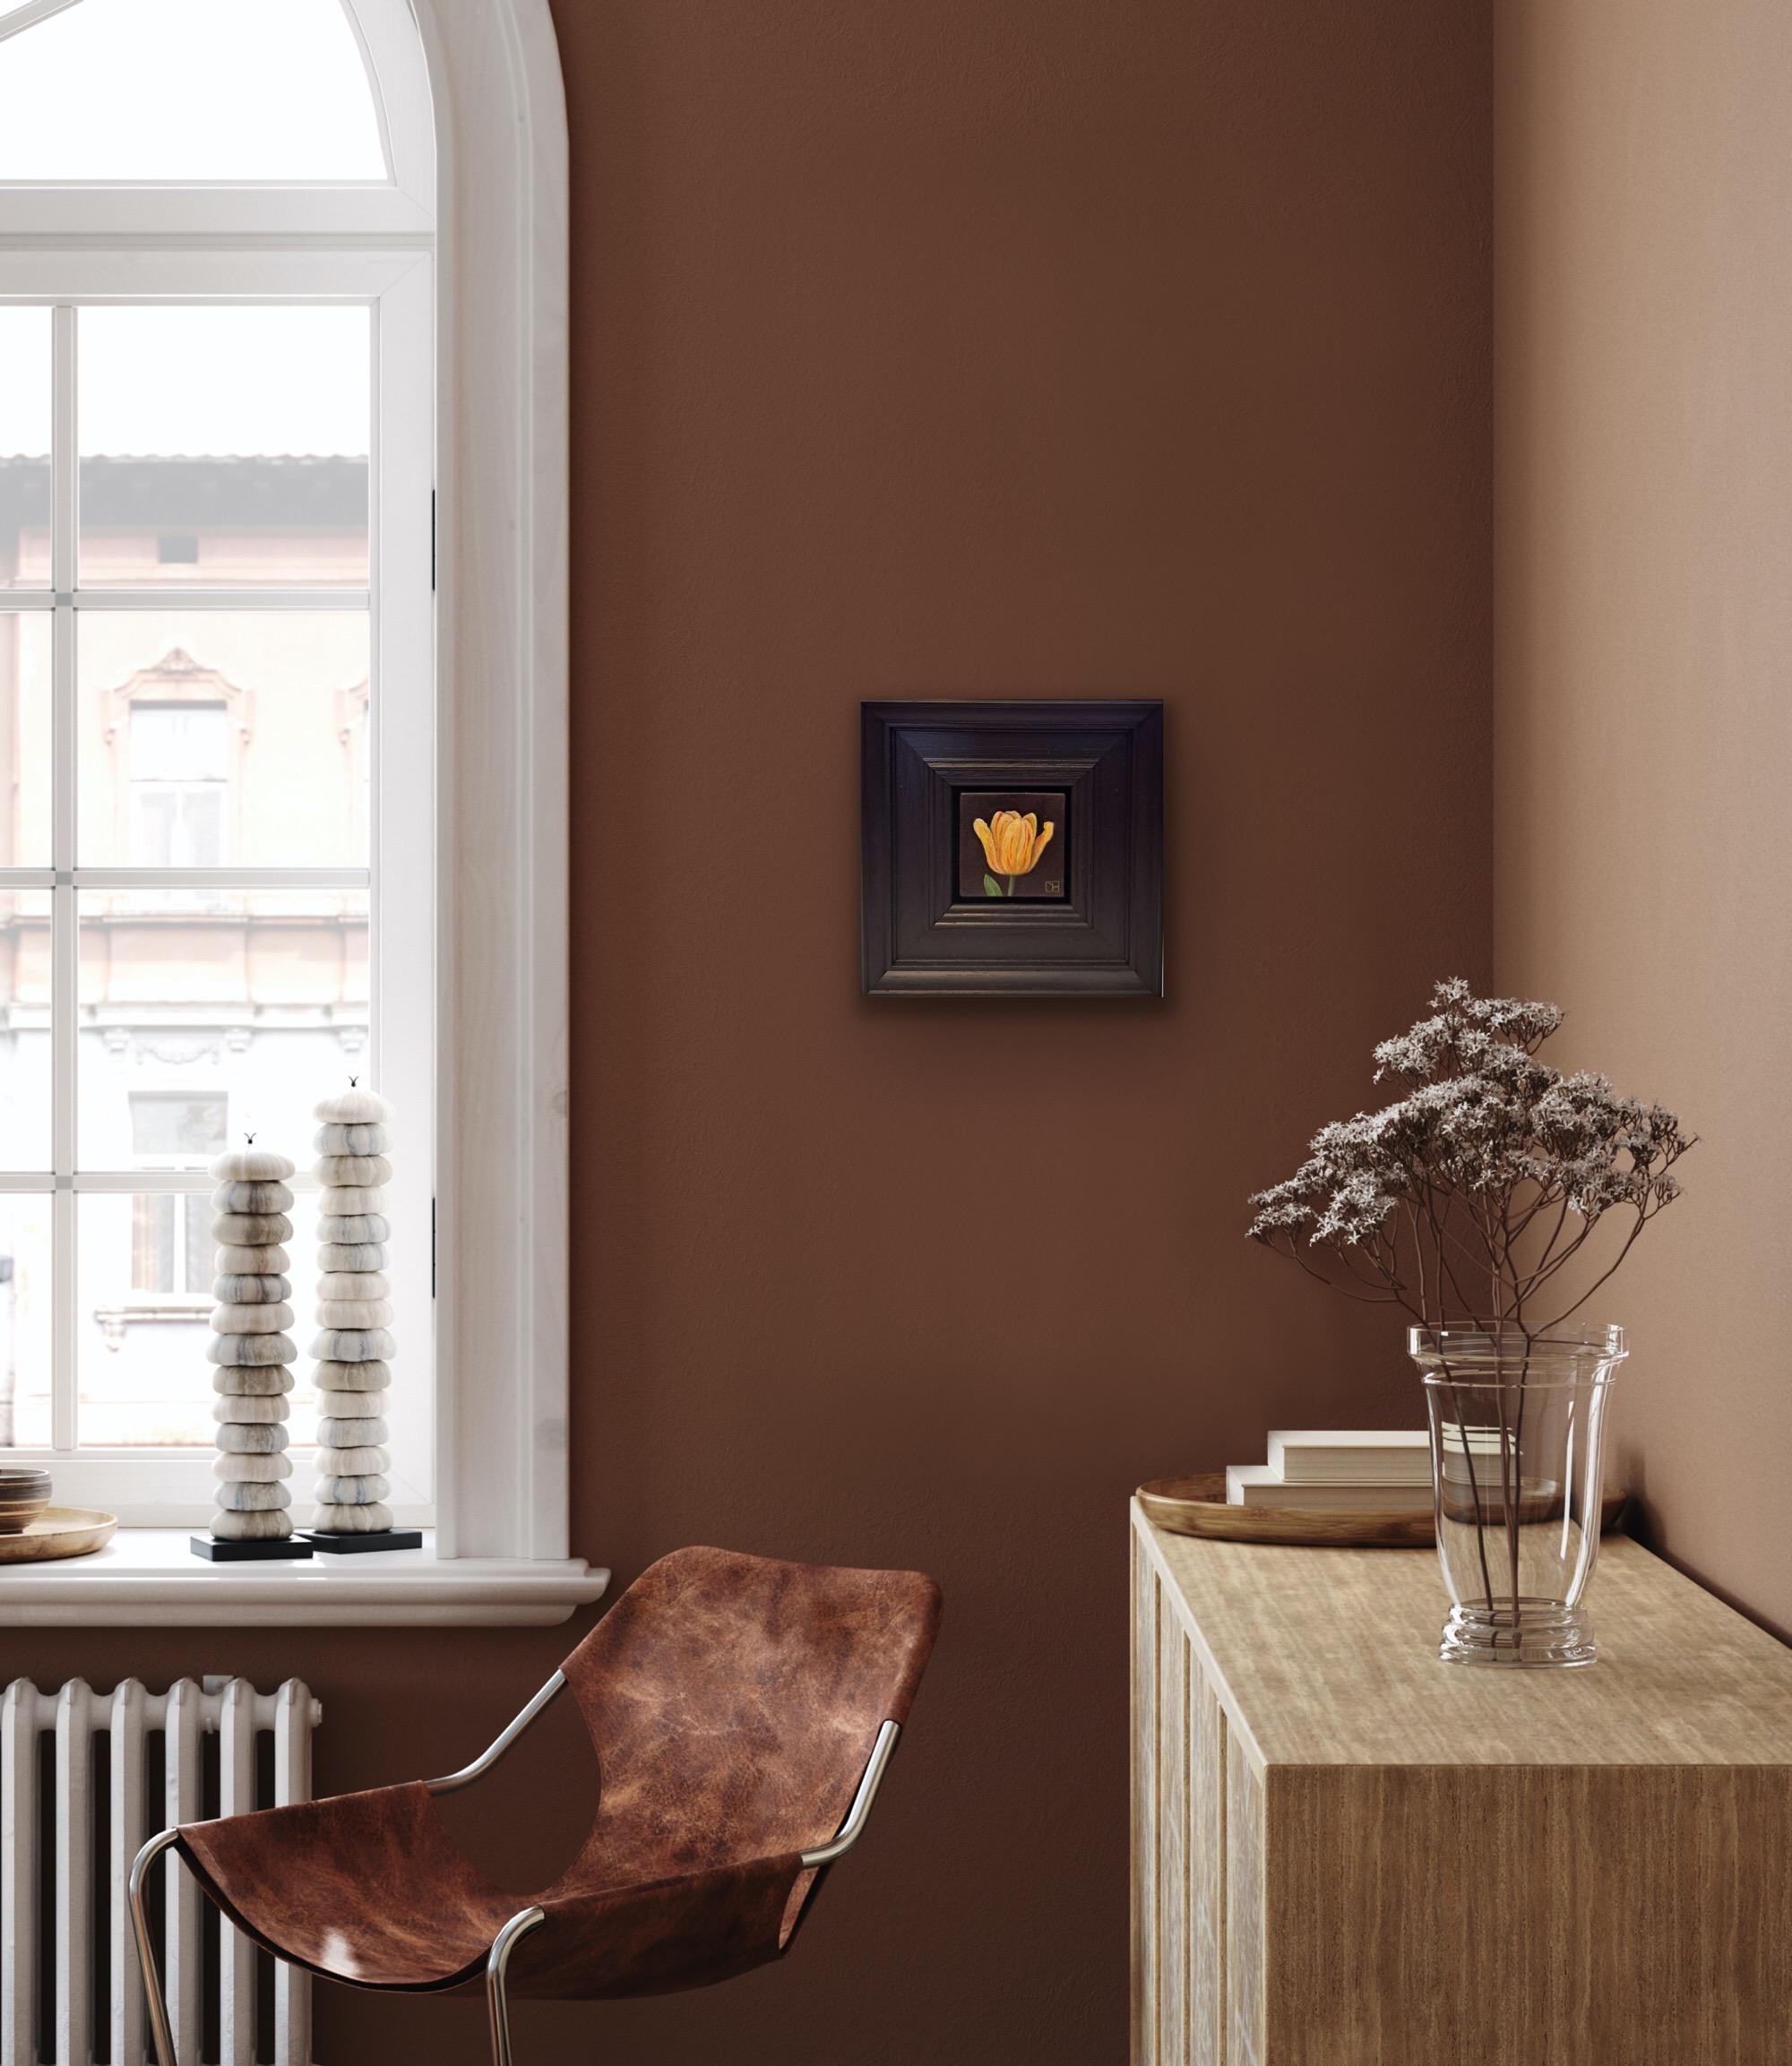 Pocket Striped Bellona Tulip is an original oil painting by Dani Humberstone as part of her Pocket Painting series featuring small scale realistic oil paintings, with a nod to baroque still life painting. The paintings are set in a black wood